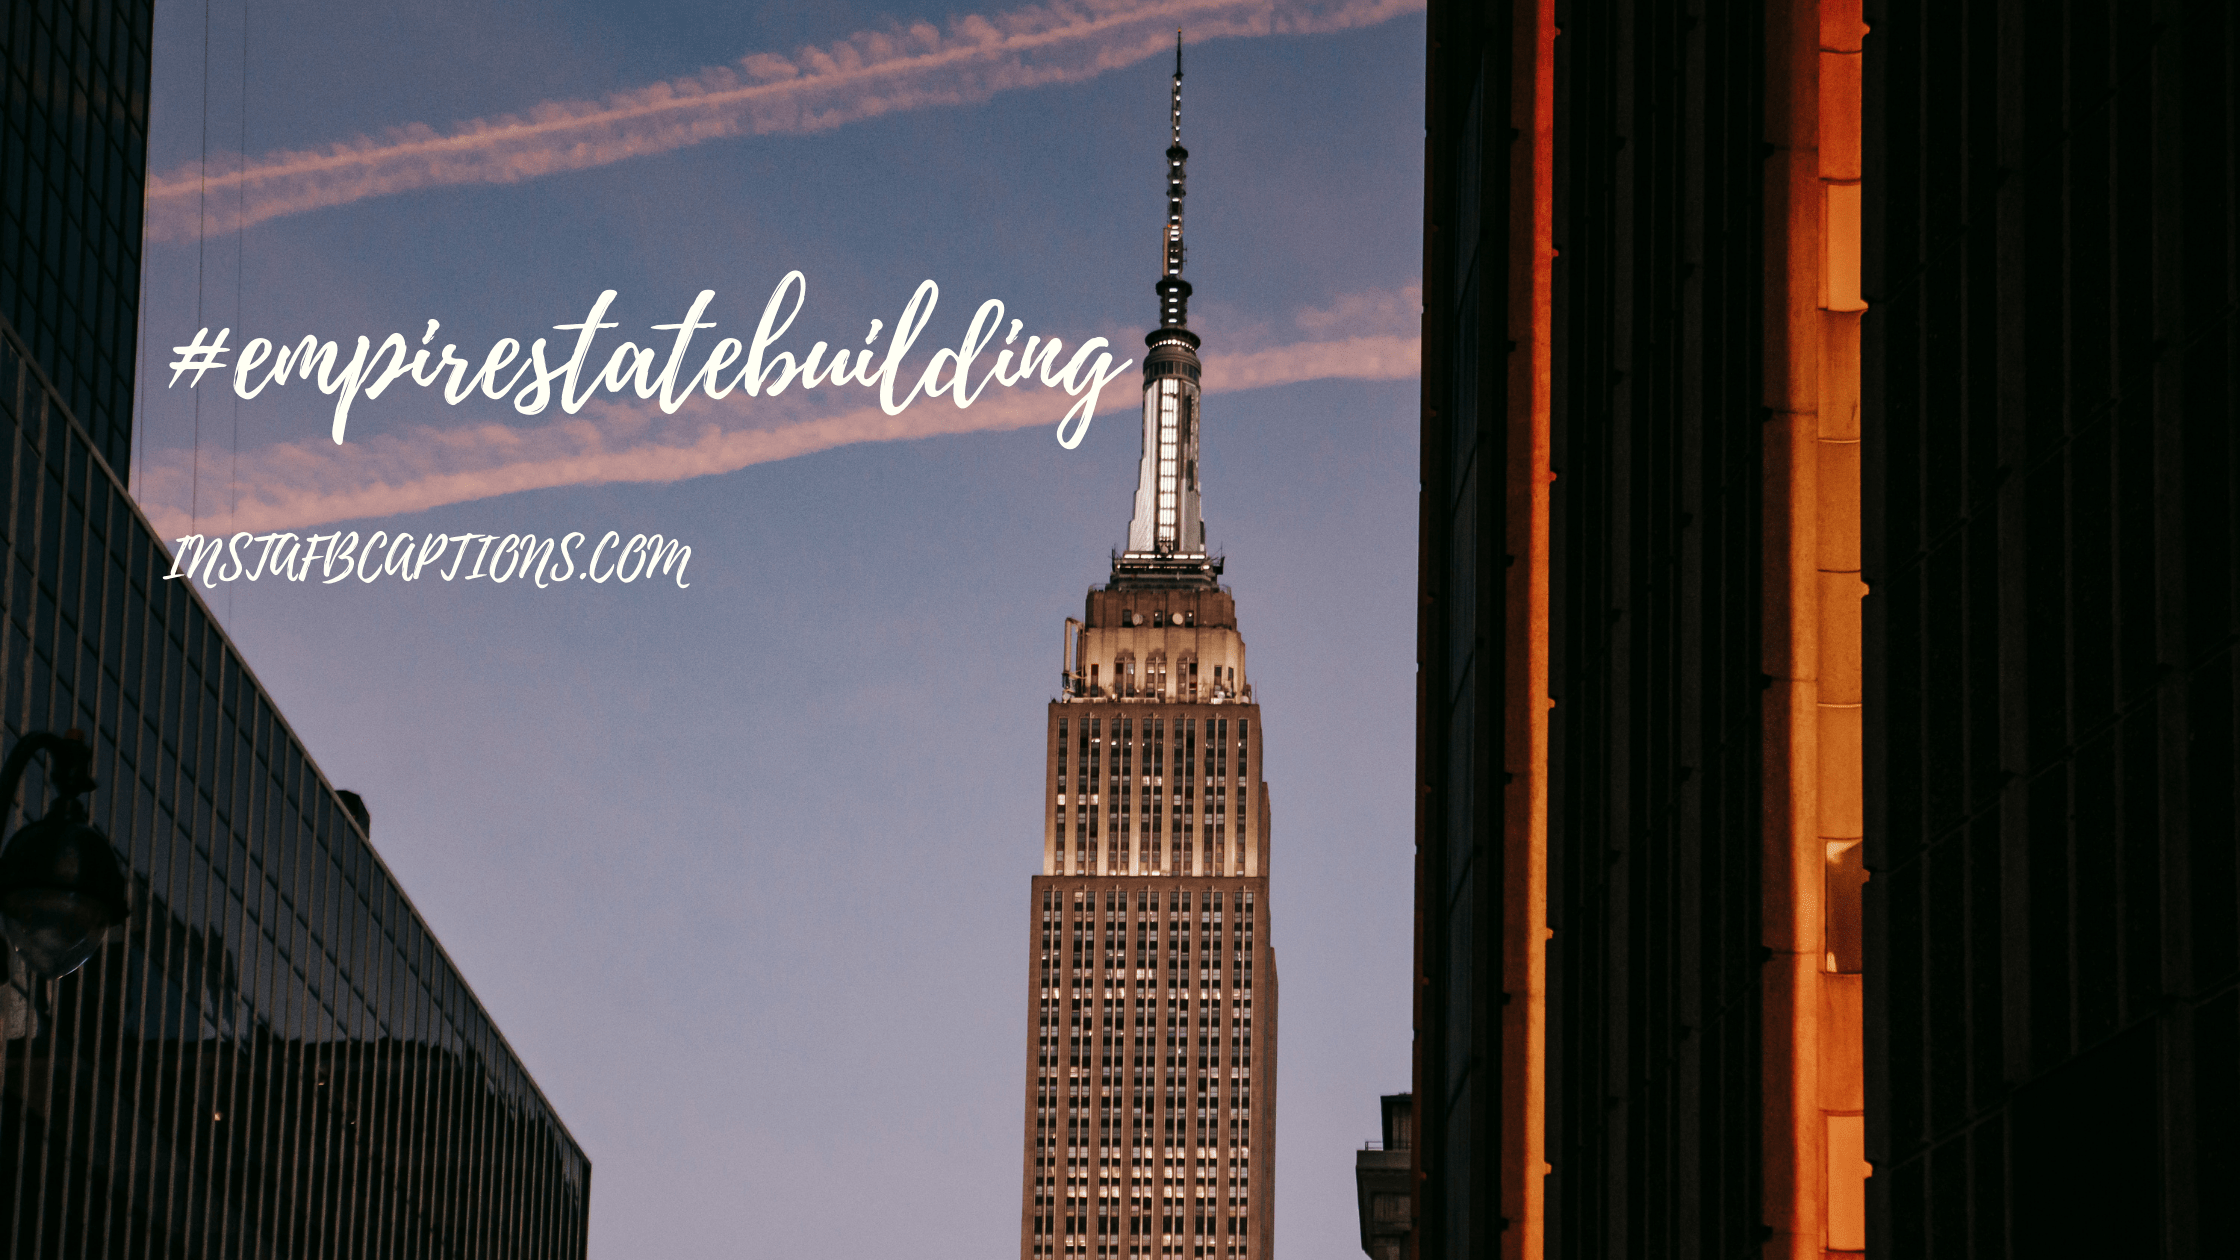 Trendy Empire State Building Hashtags  - Trendy Empire State Building Hashtags - 101 Empire State Building Instagram Captions Quotes Hashtags in 2022